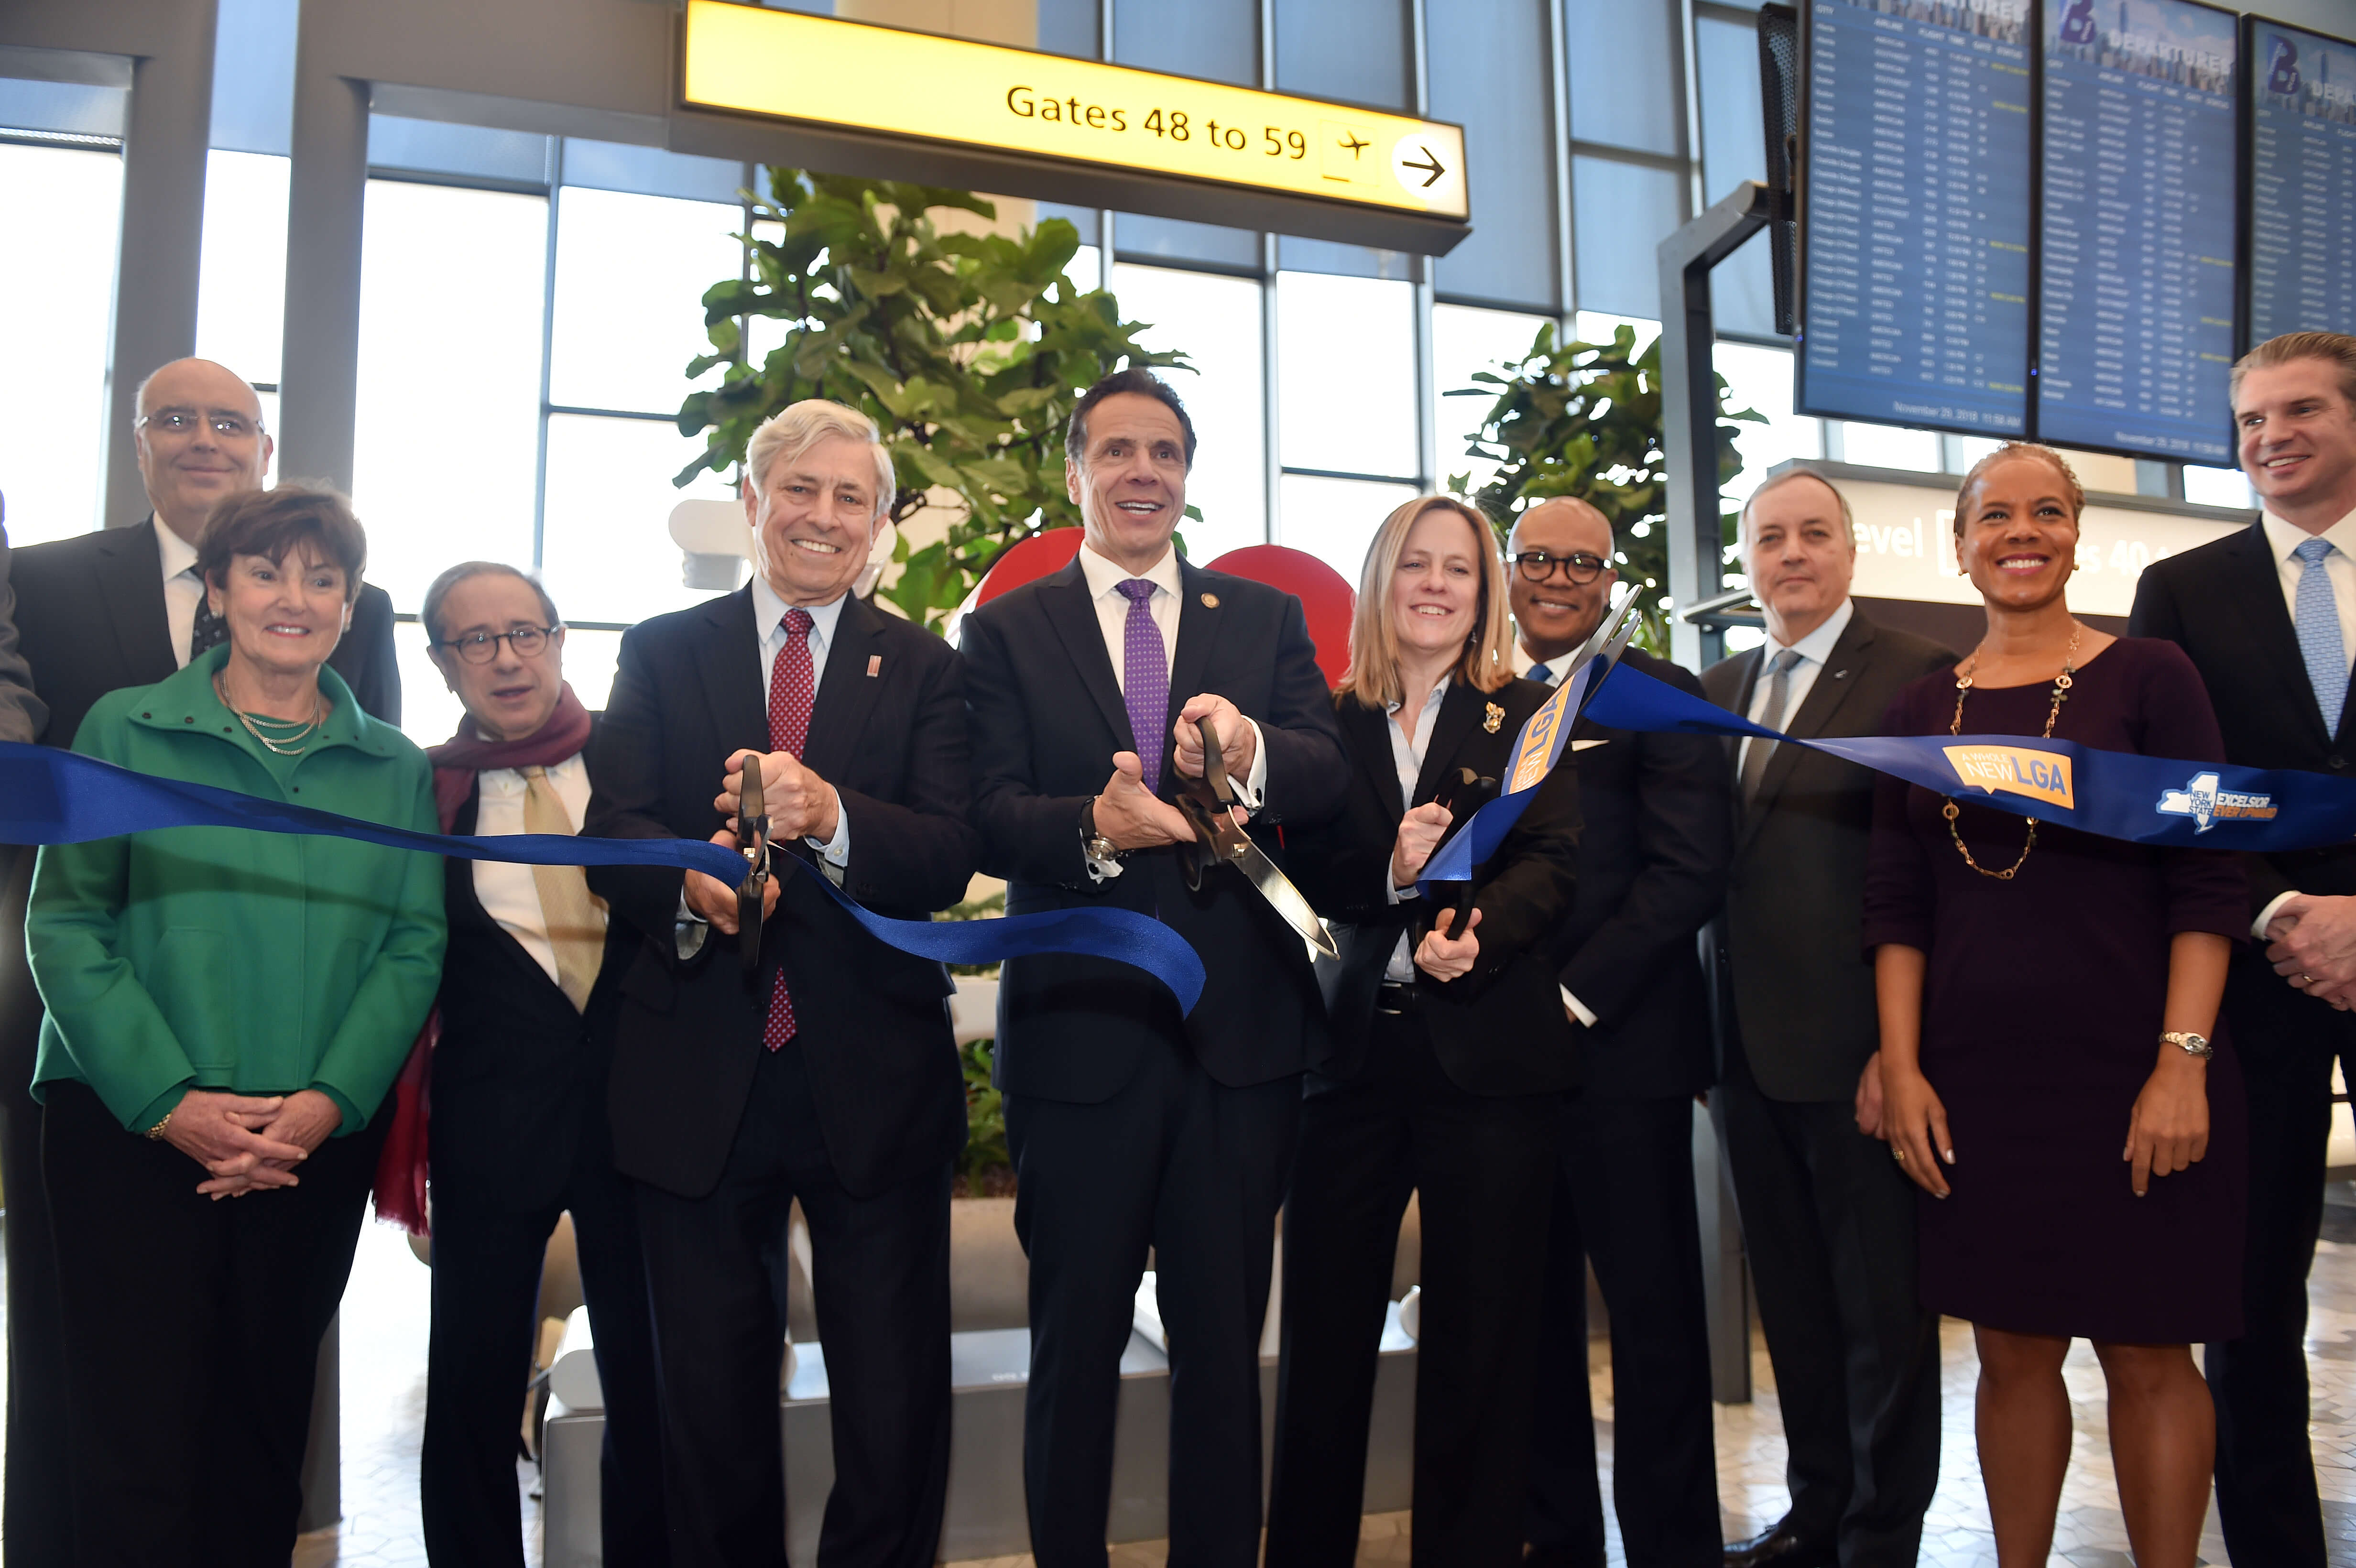 Governor Andrew Cuomo and Queens Borough President Melinda Katz helped cut the ribbon on Nov. 29 at LaGuardia Airport's new gates.